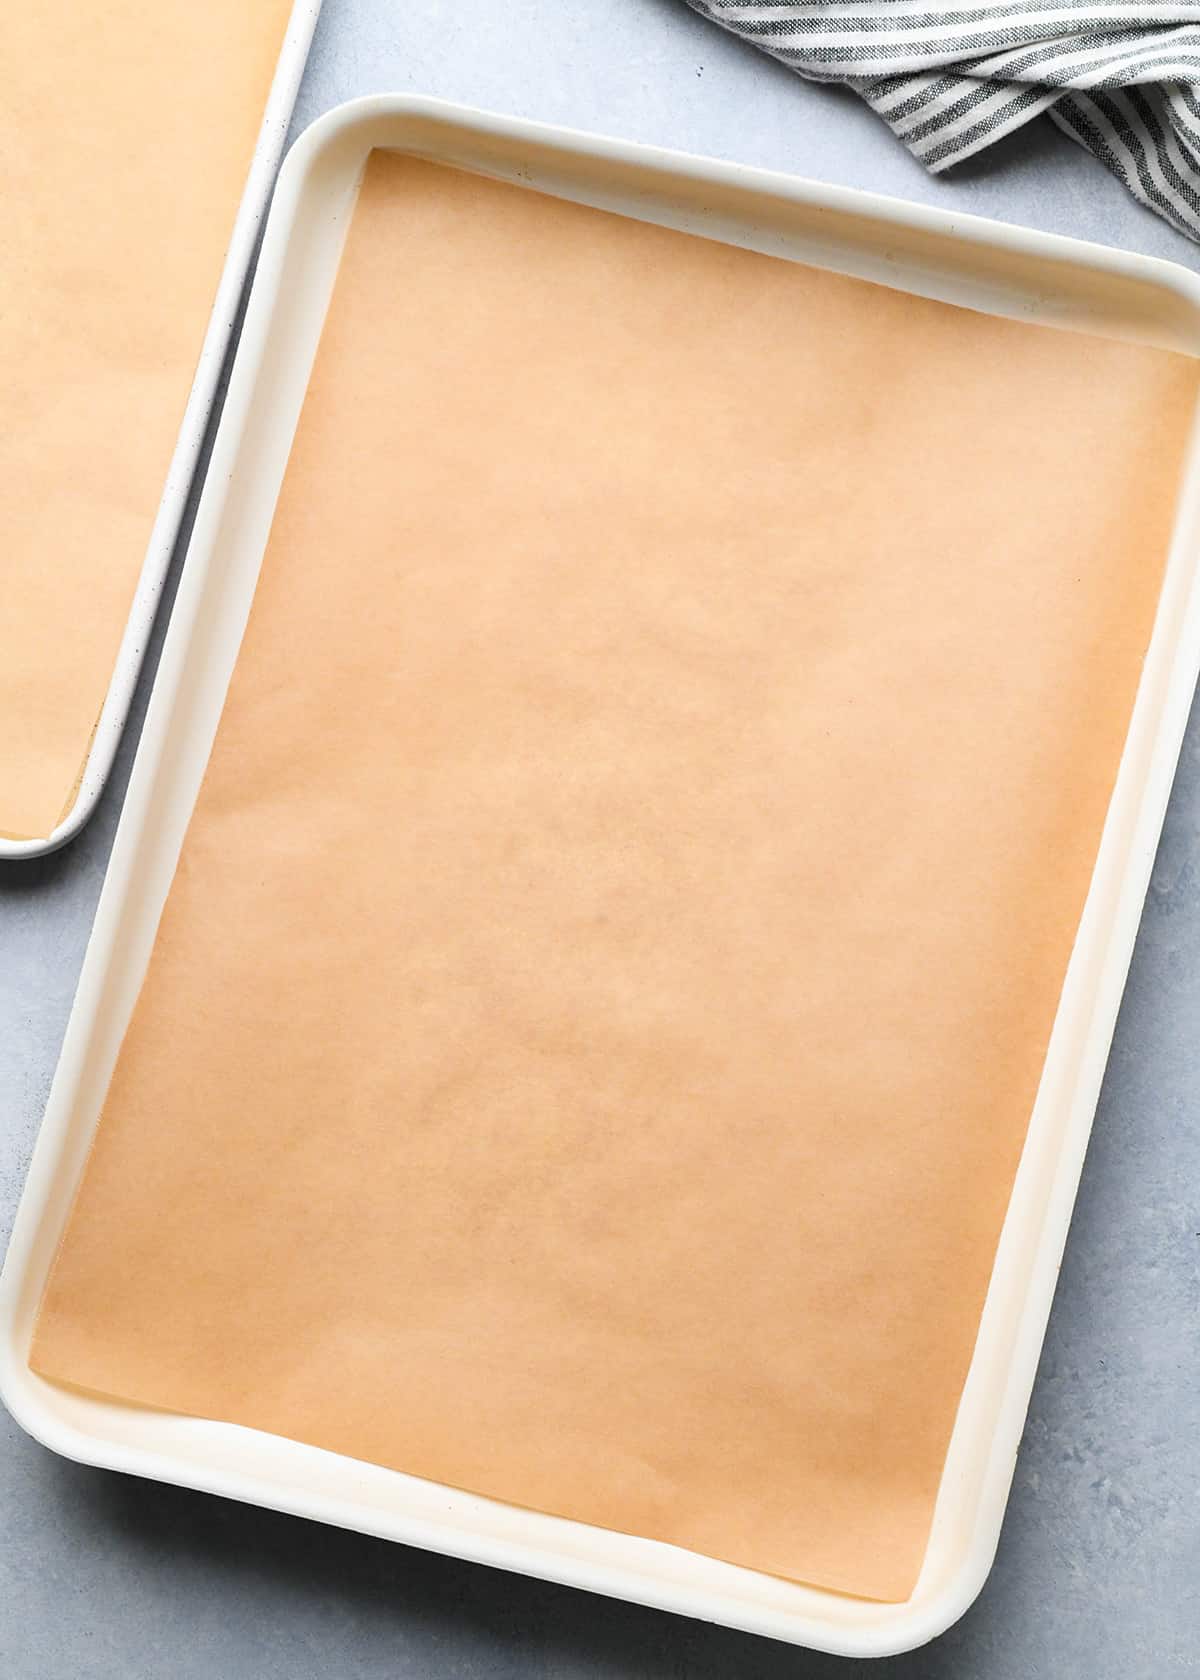 two baking sheets lined with parchment paper